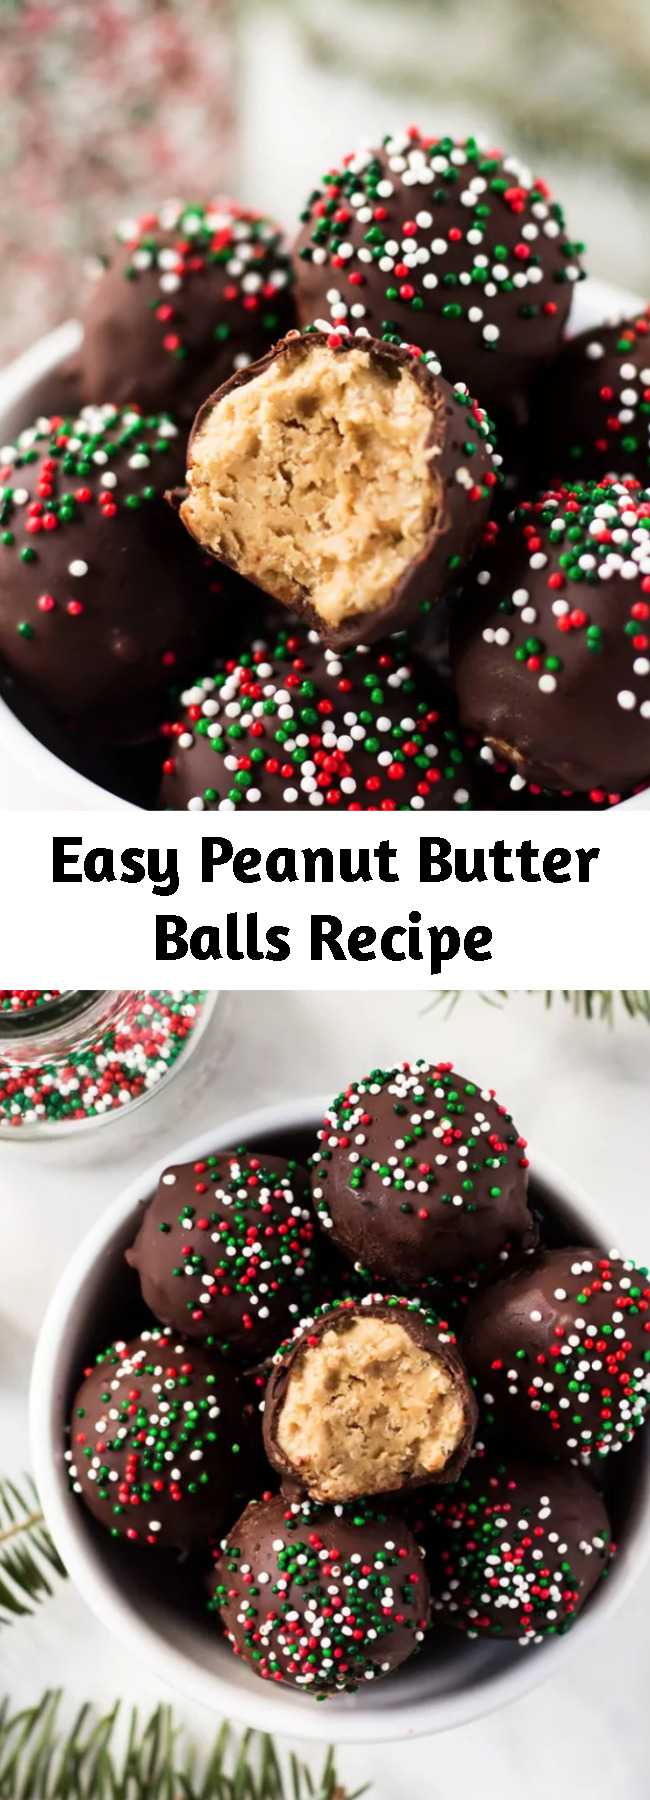 Easy Peanut Butter Balls Recipe - Peanut butter balls are made with creamy peanut butter, rice krispies, confectioners sugar and chocolate. This no-bake recipe requires only four ingredients. It is perfect for Christmas and holiday parties. #nobake #peanutbutterballs #christmas #ricekrispies #peanutbutter